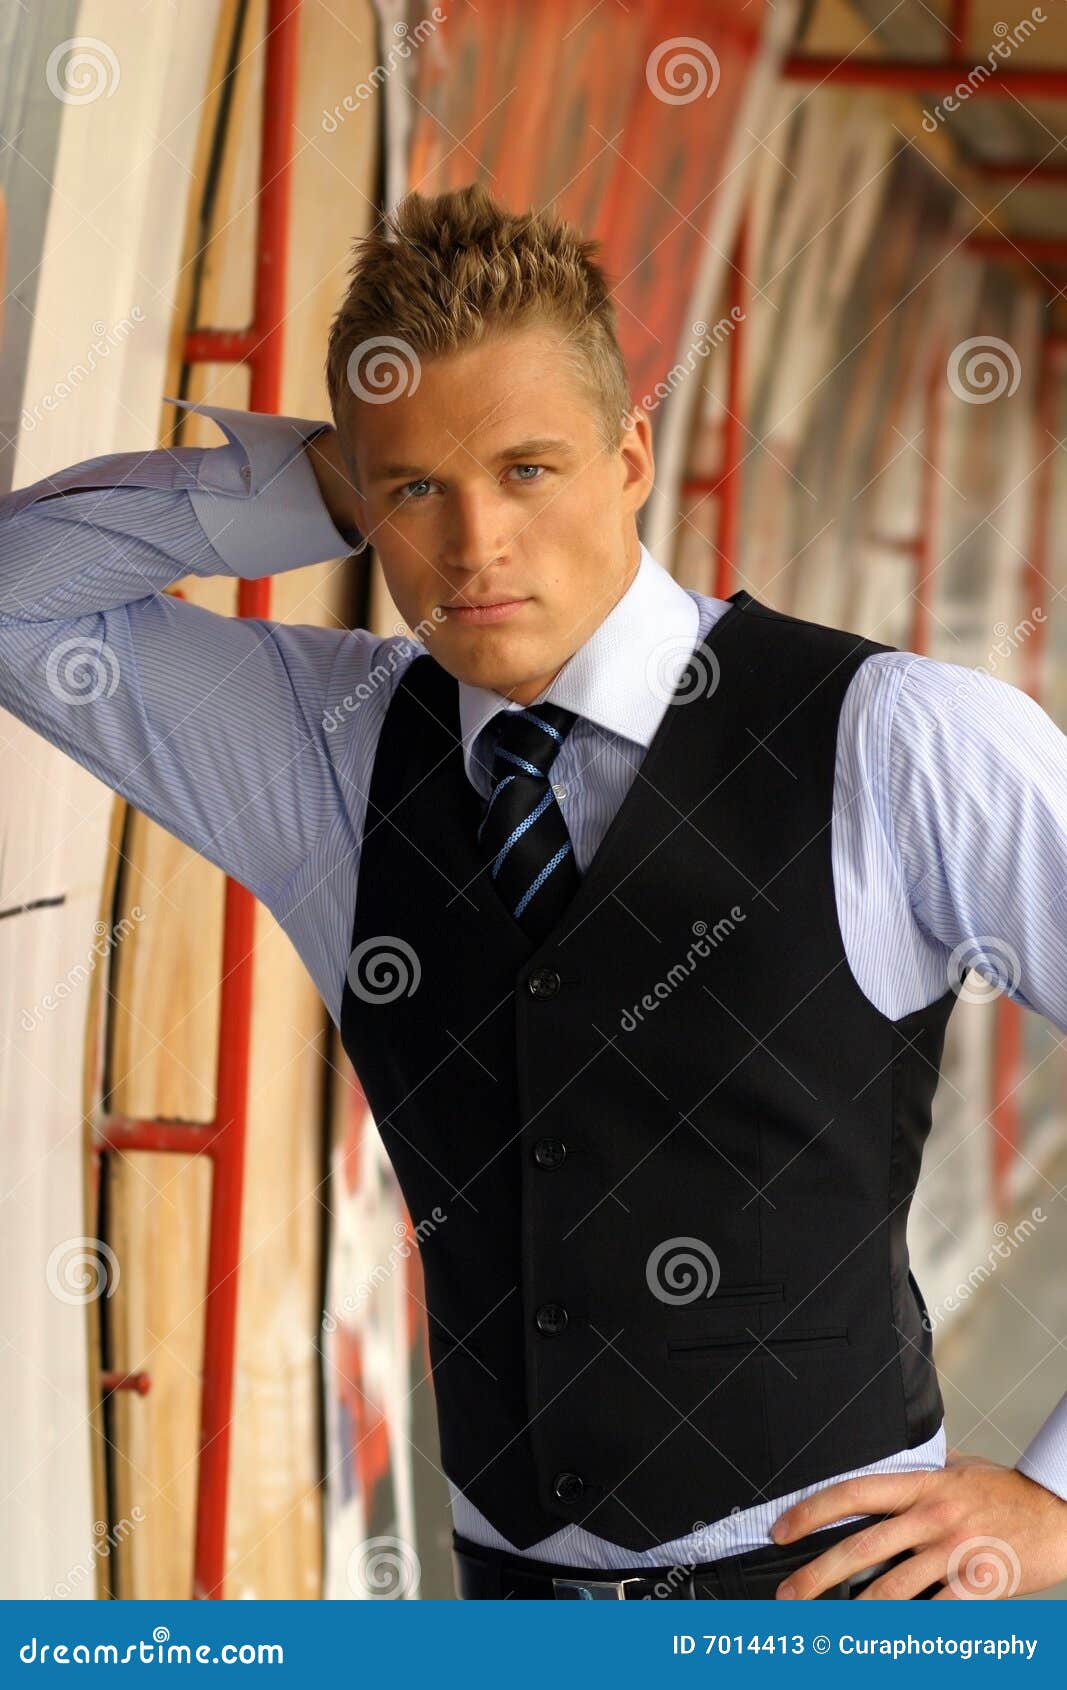 young male model leaning on wall